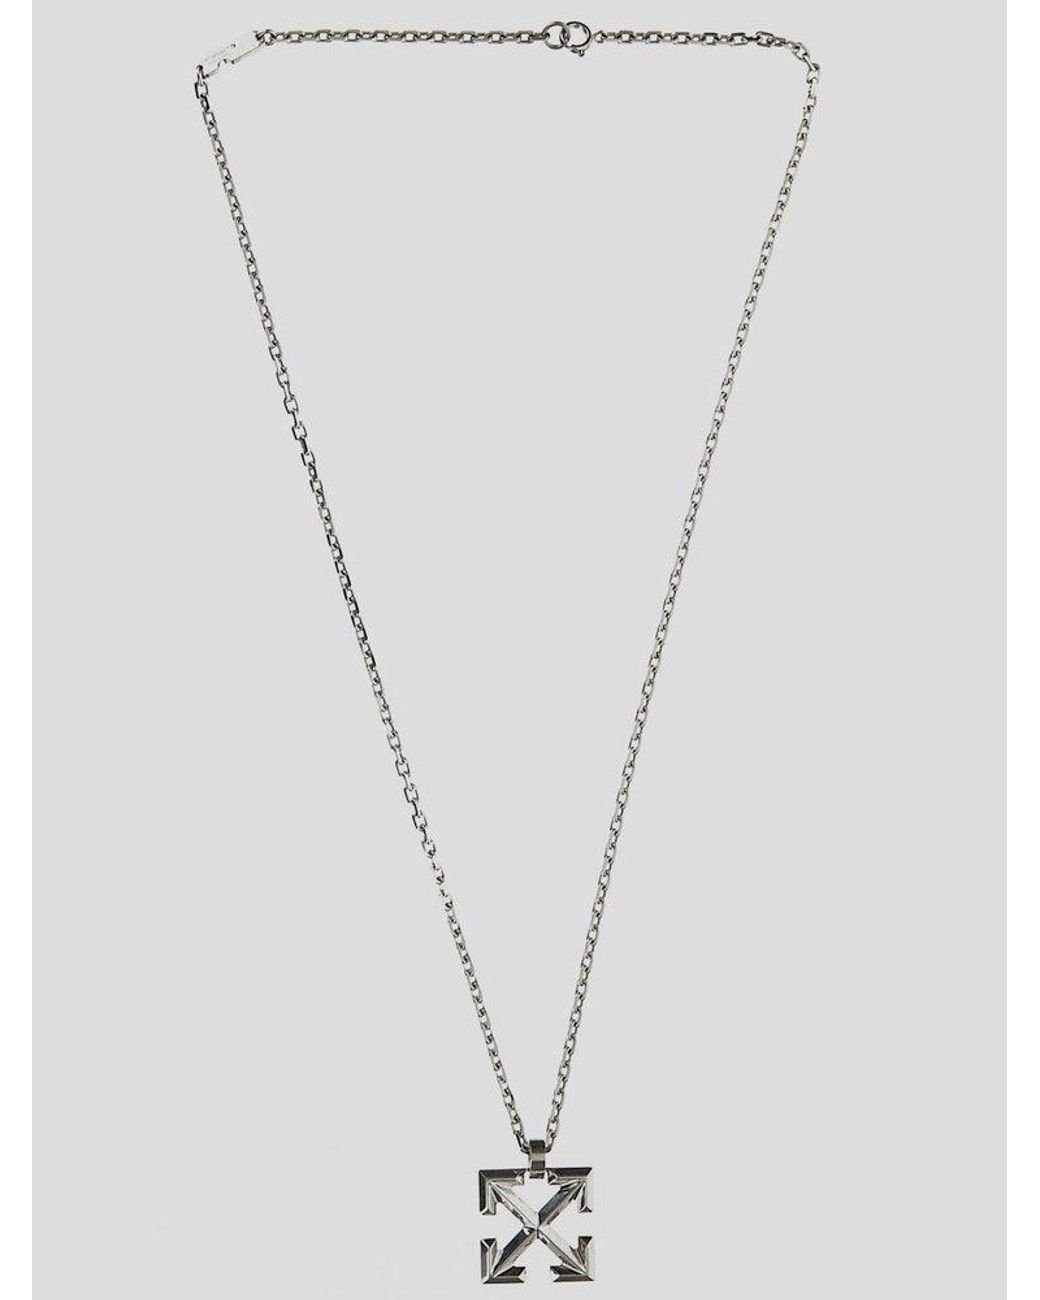 Off-White c/o Virgil Abloh Arrow Chain Necklace in Metallic for Men